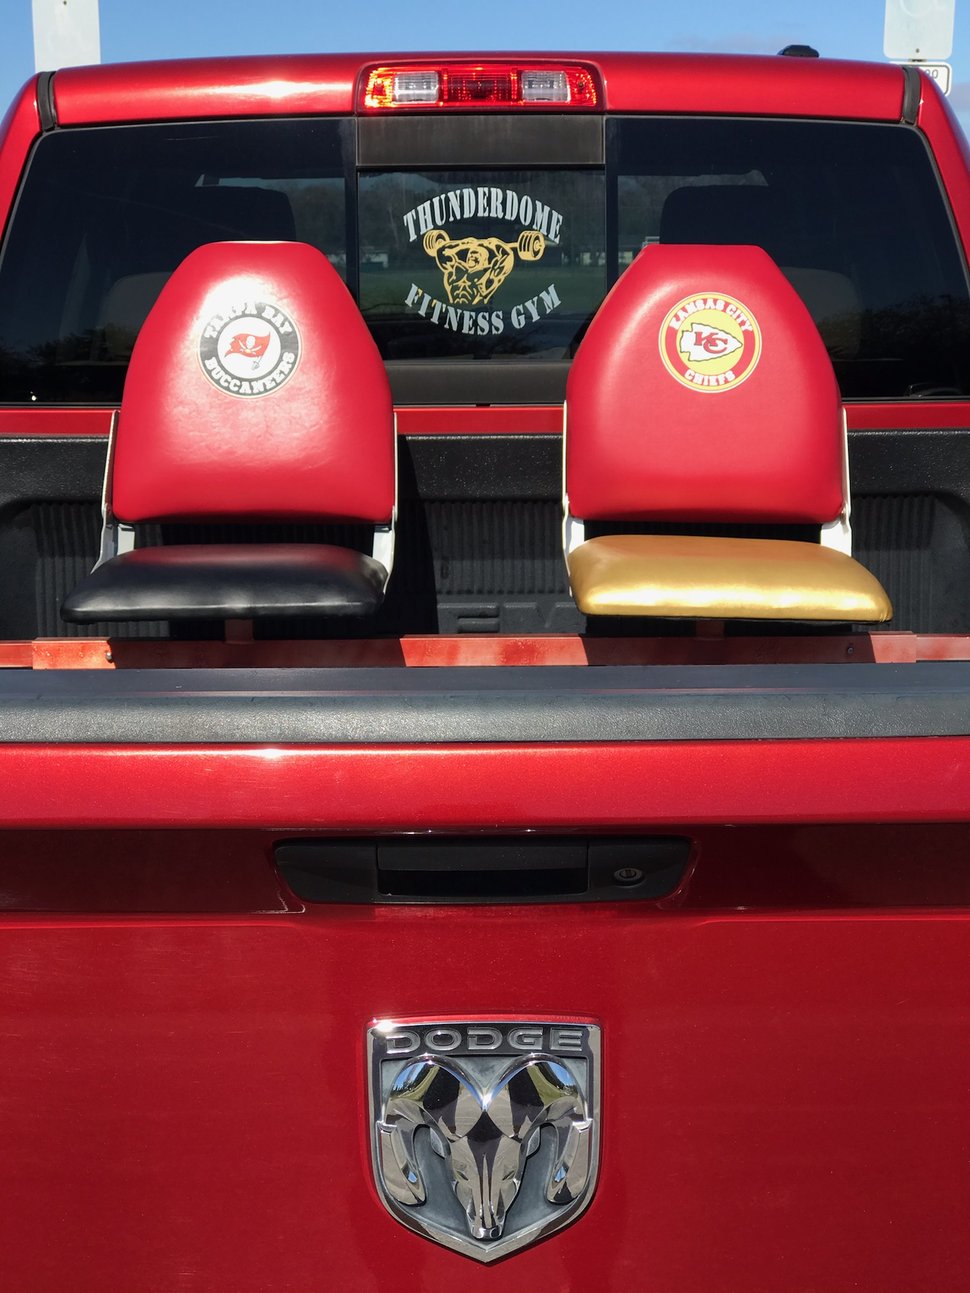 Truck bed seats